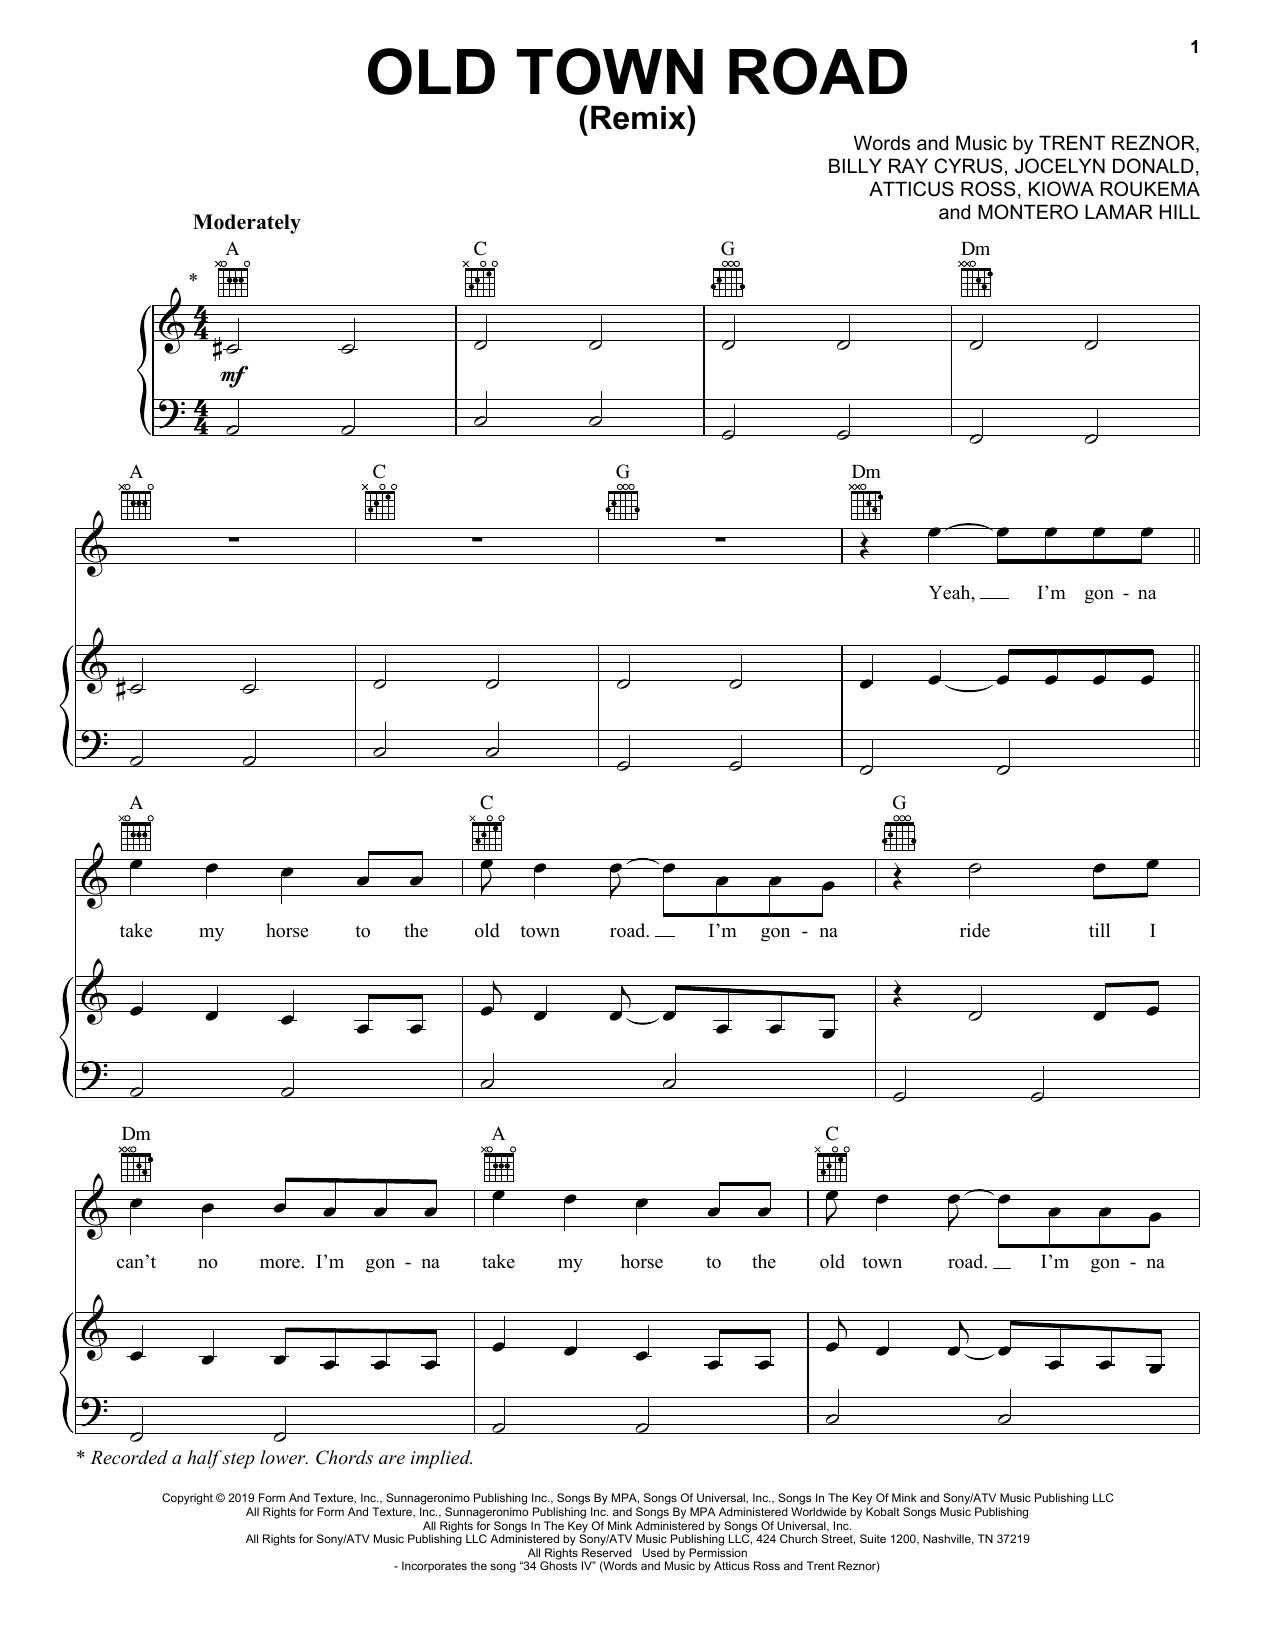 Lil Nas X Feat Billy Ray Cyrus Old Town Road Remix Sheet Music Pdf Notes Chords Pop Score Super Easy Piano Download Printable Sku 420037 - roblox id code for old town road by lil nax x